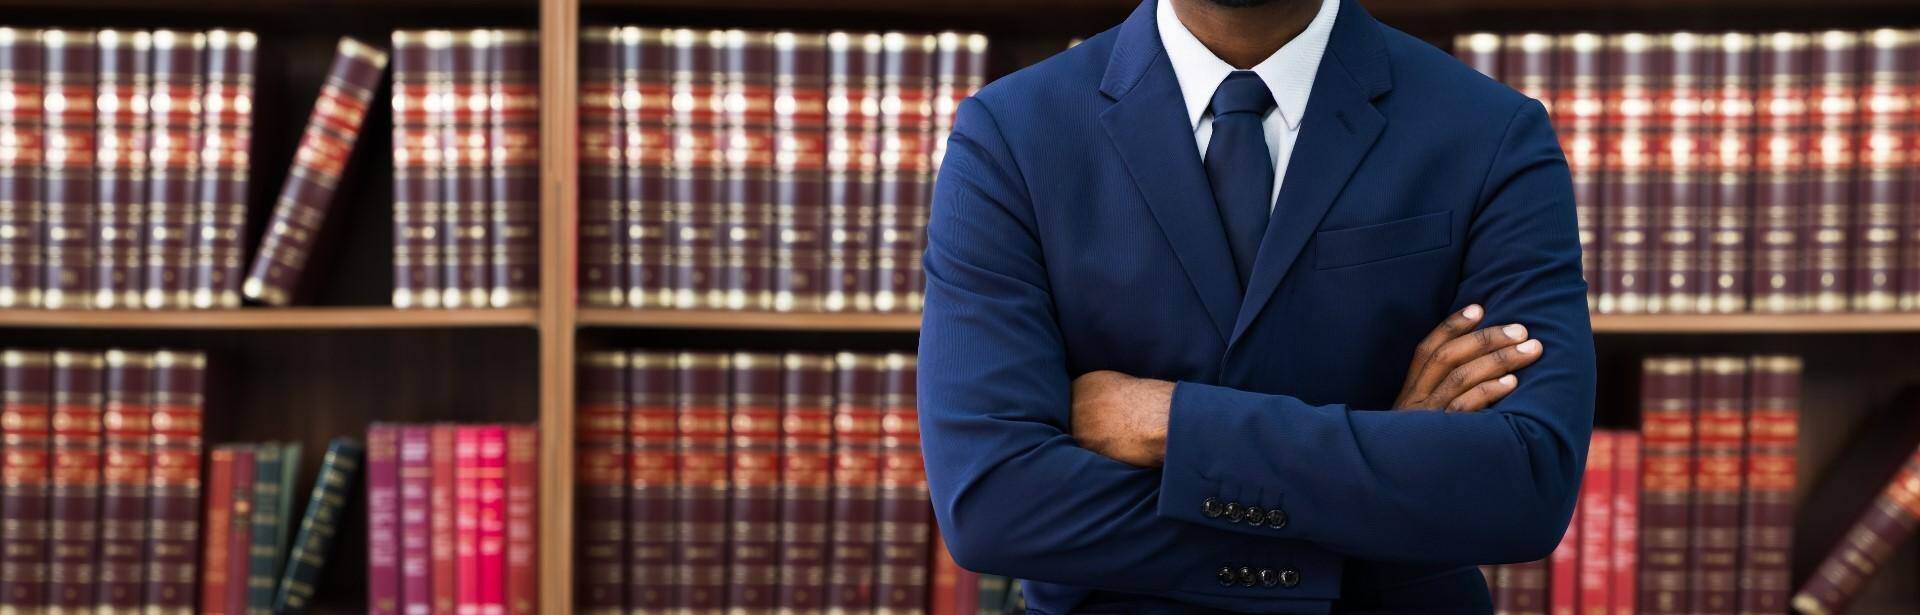 A black lawyer standing in front of a bookshelf of law book in Tucker, Georgia